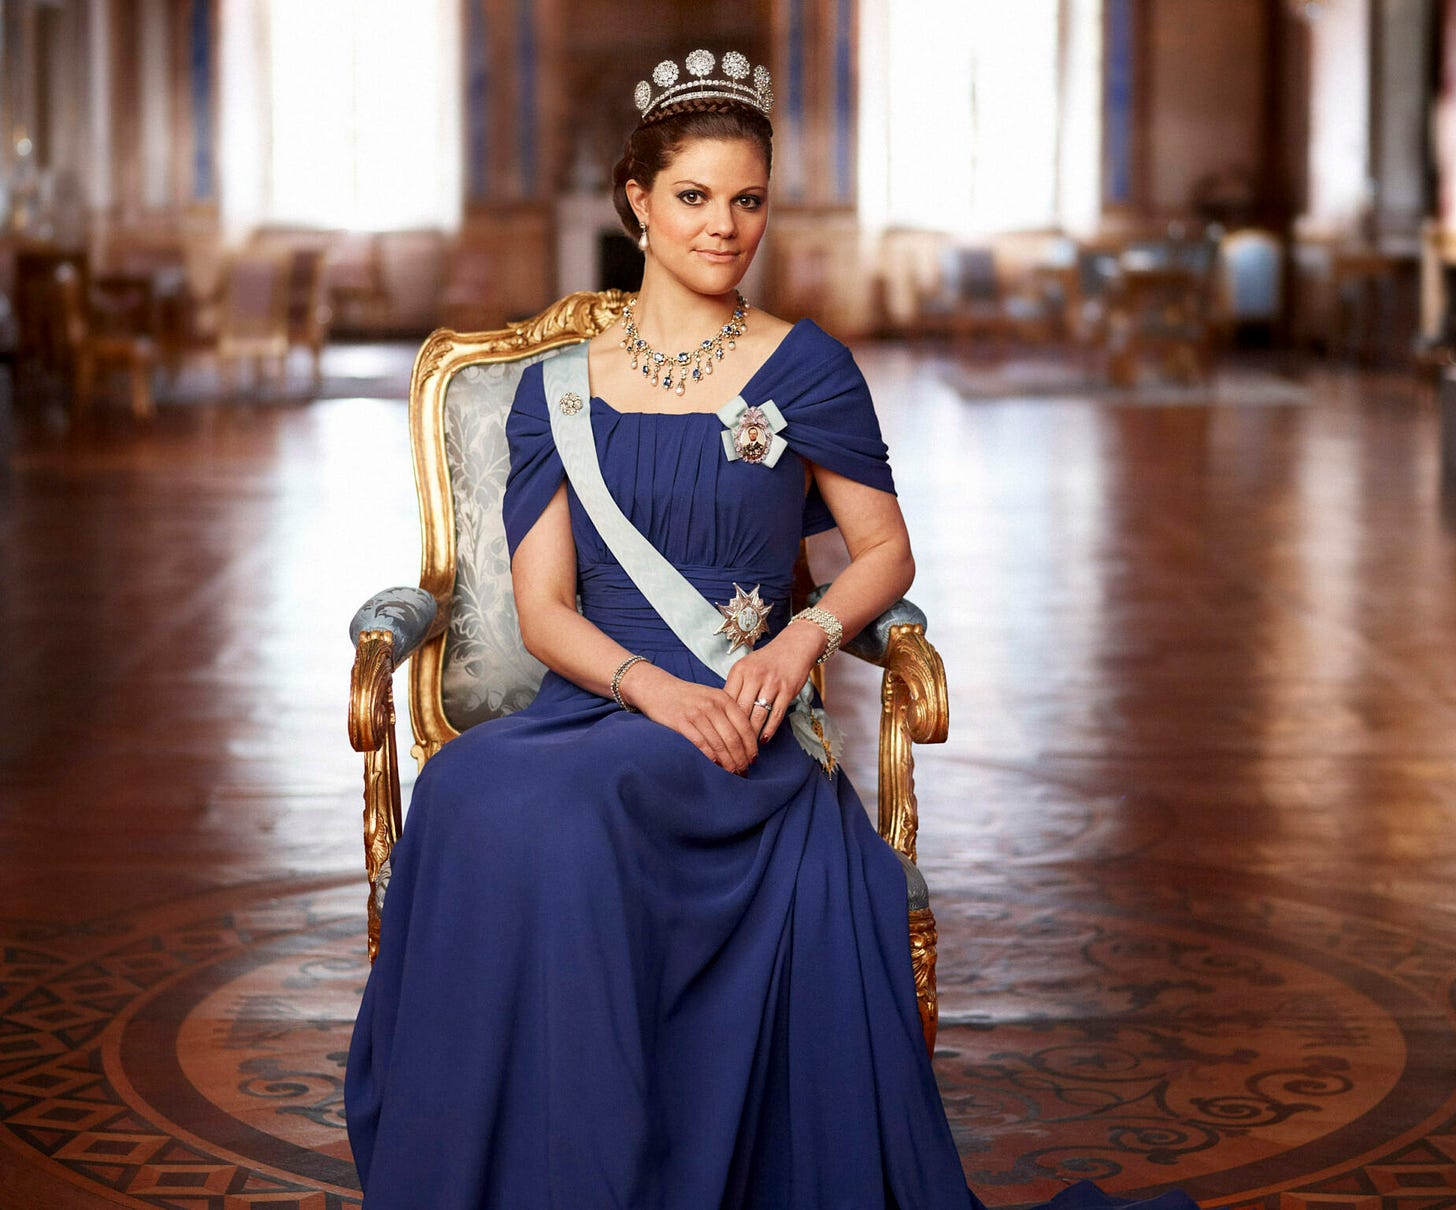 10 facts about Crown Princess Victoria of Sweden - Swedes in the States